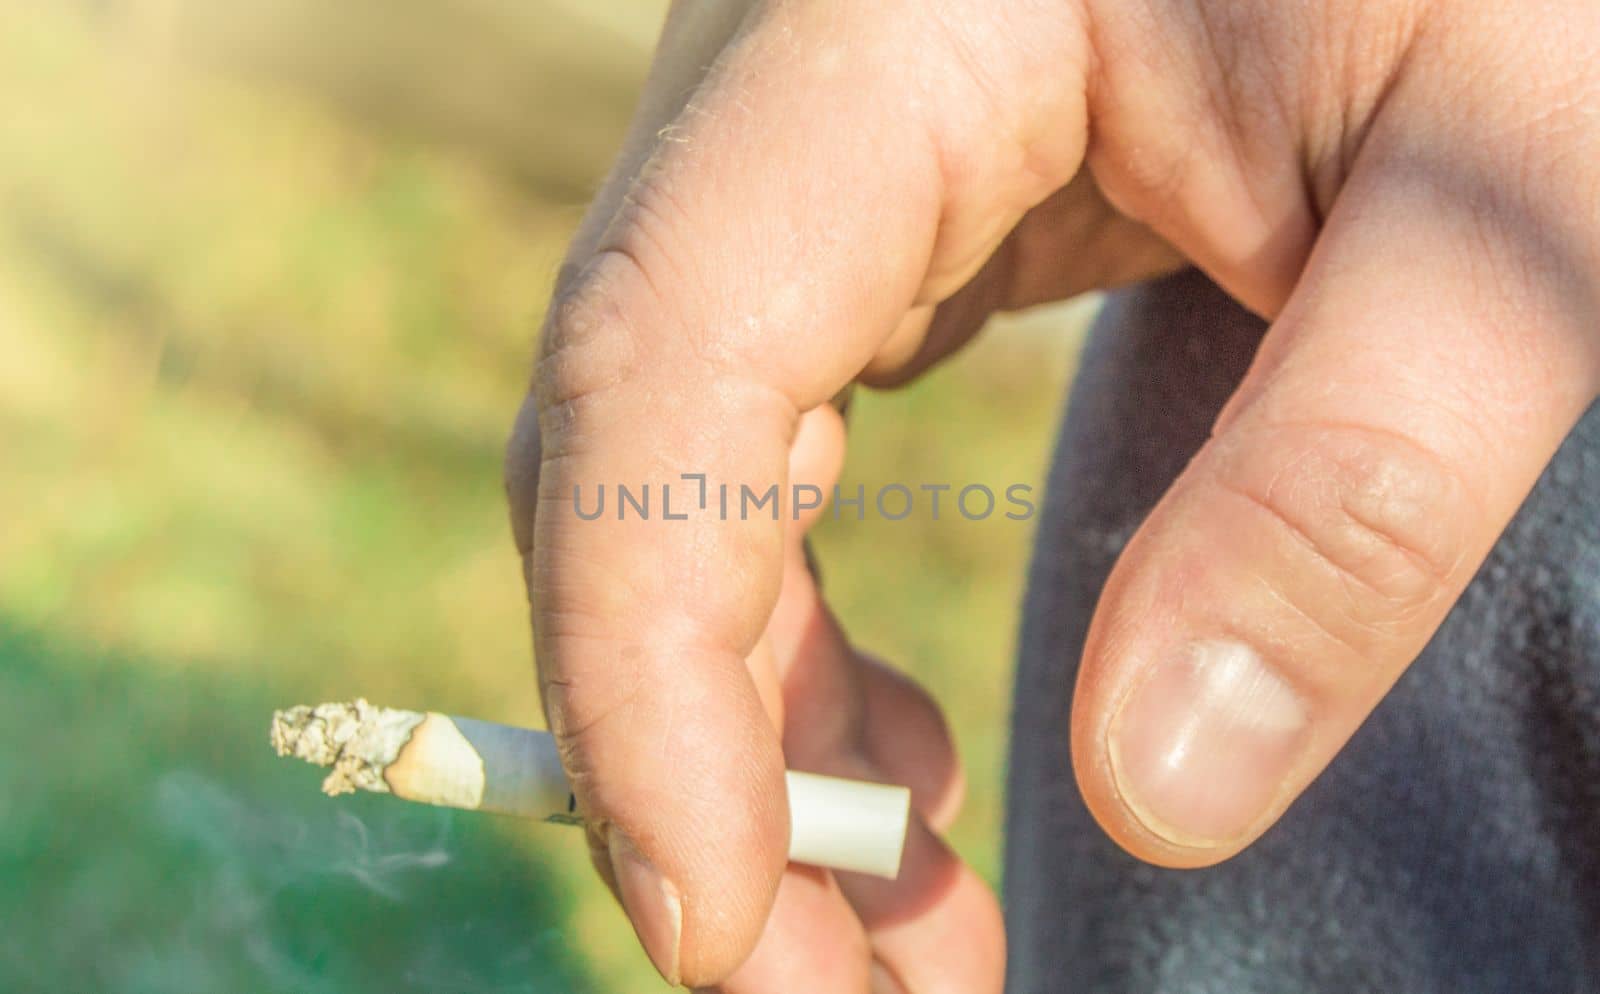 Close-up of an elderly man's hand Smoking a cigarette, outdoors, on a summer day.